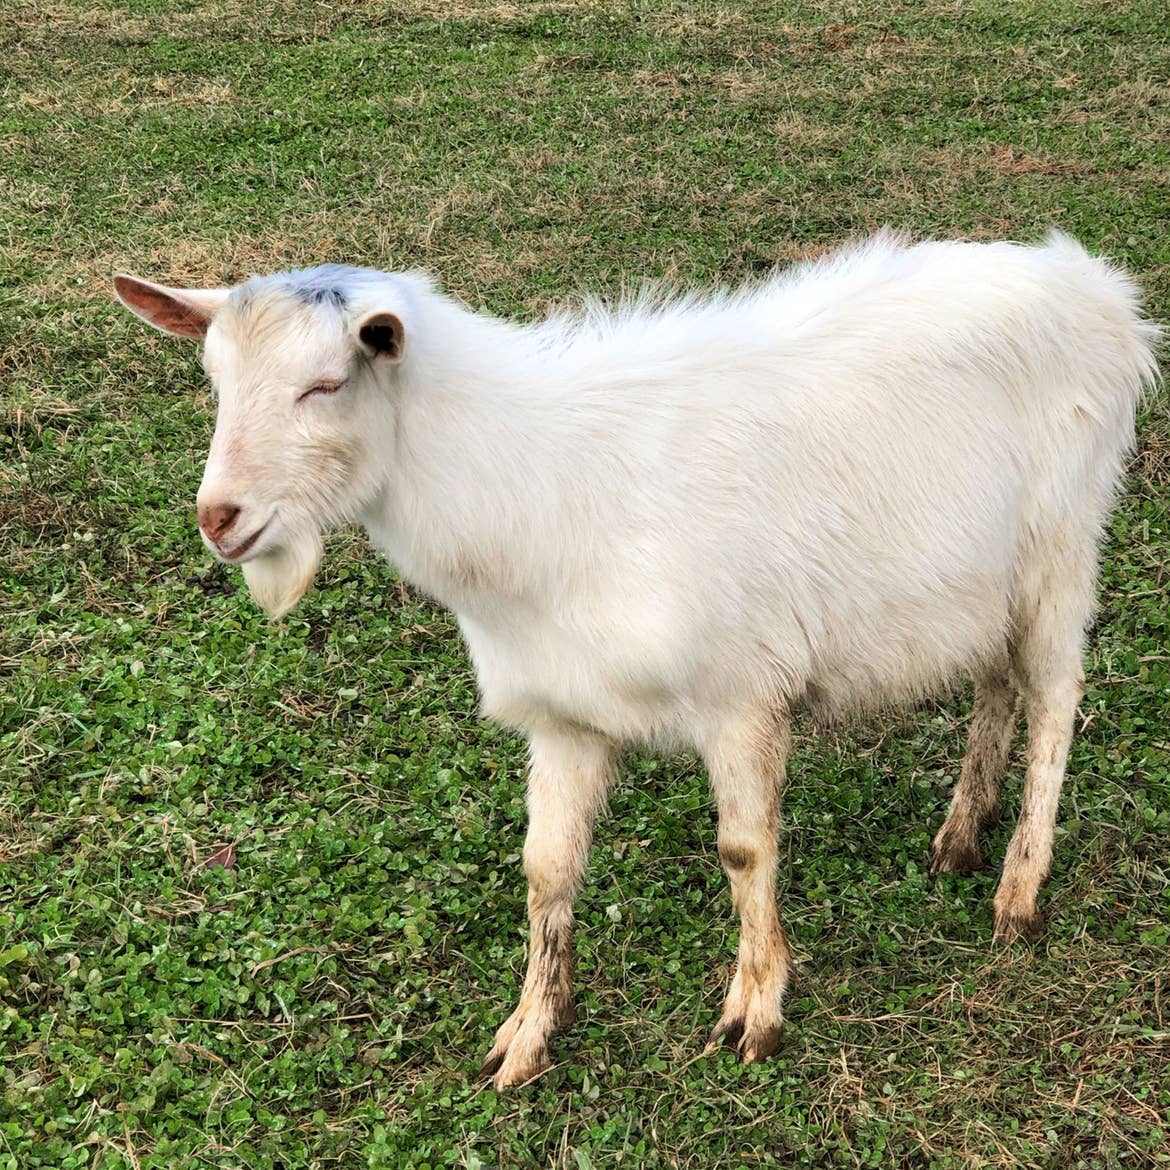 A little white goat strolls the greens at the farmyard located at Biltmore Estates Village.